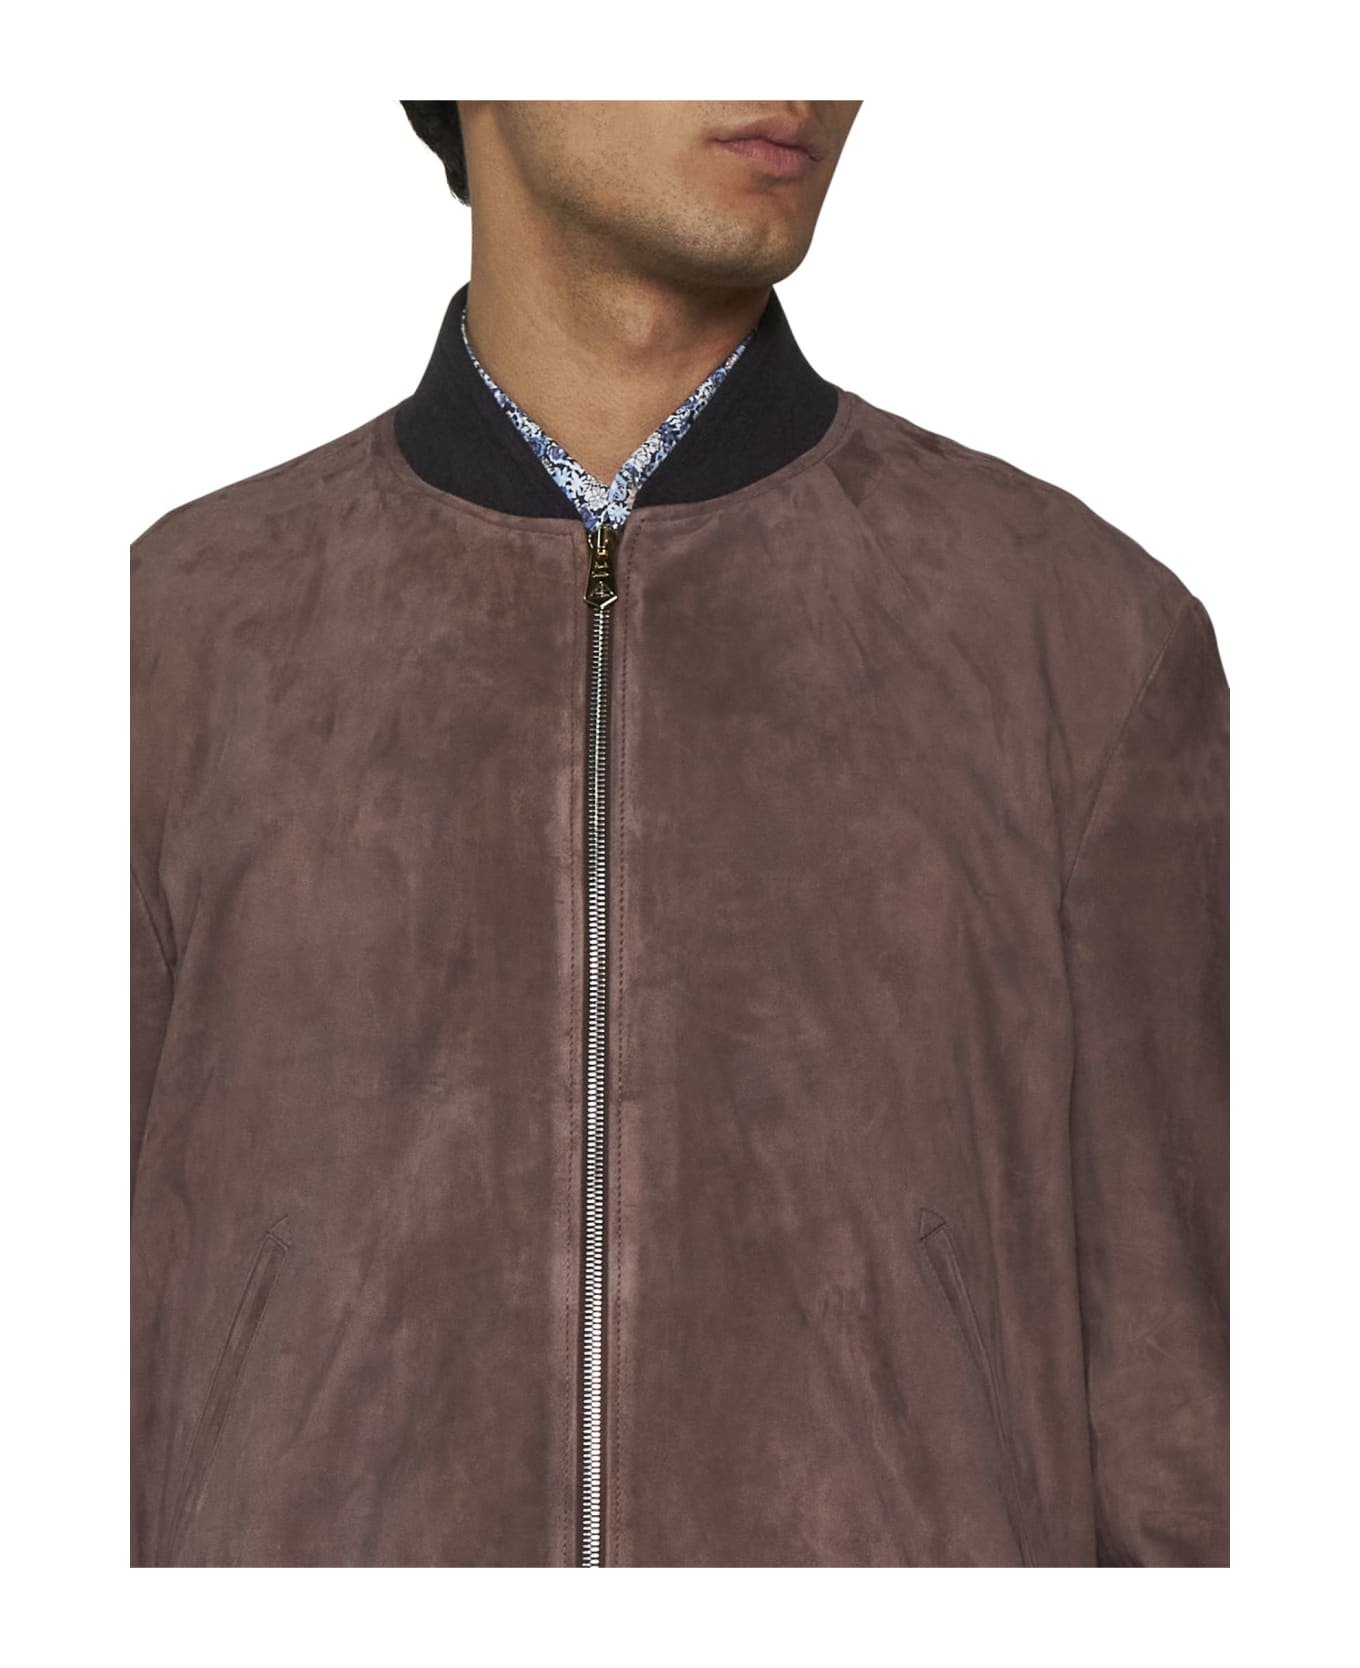 Paul Smith Suede Bomber Jacket - Brown